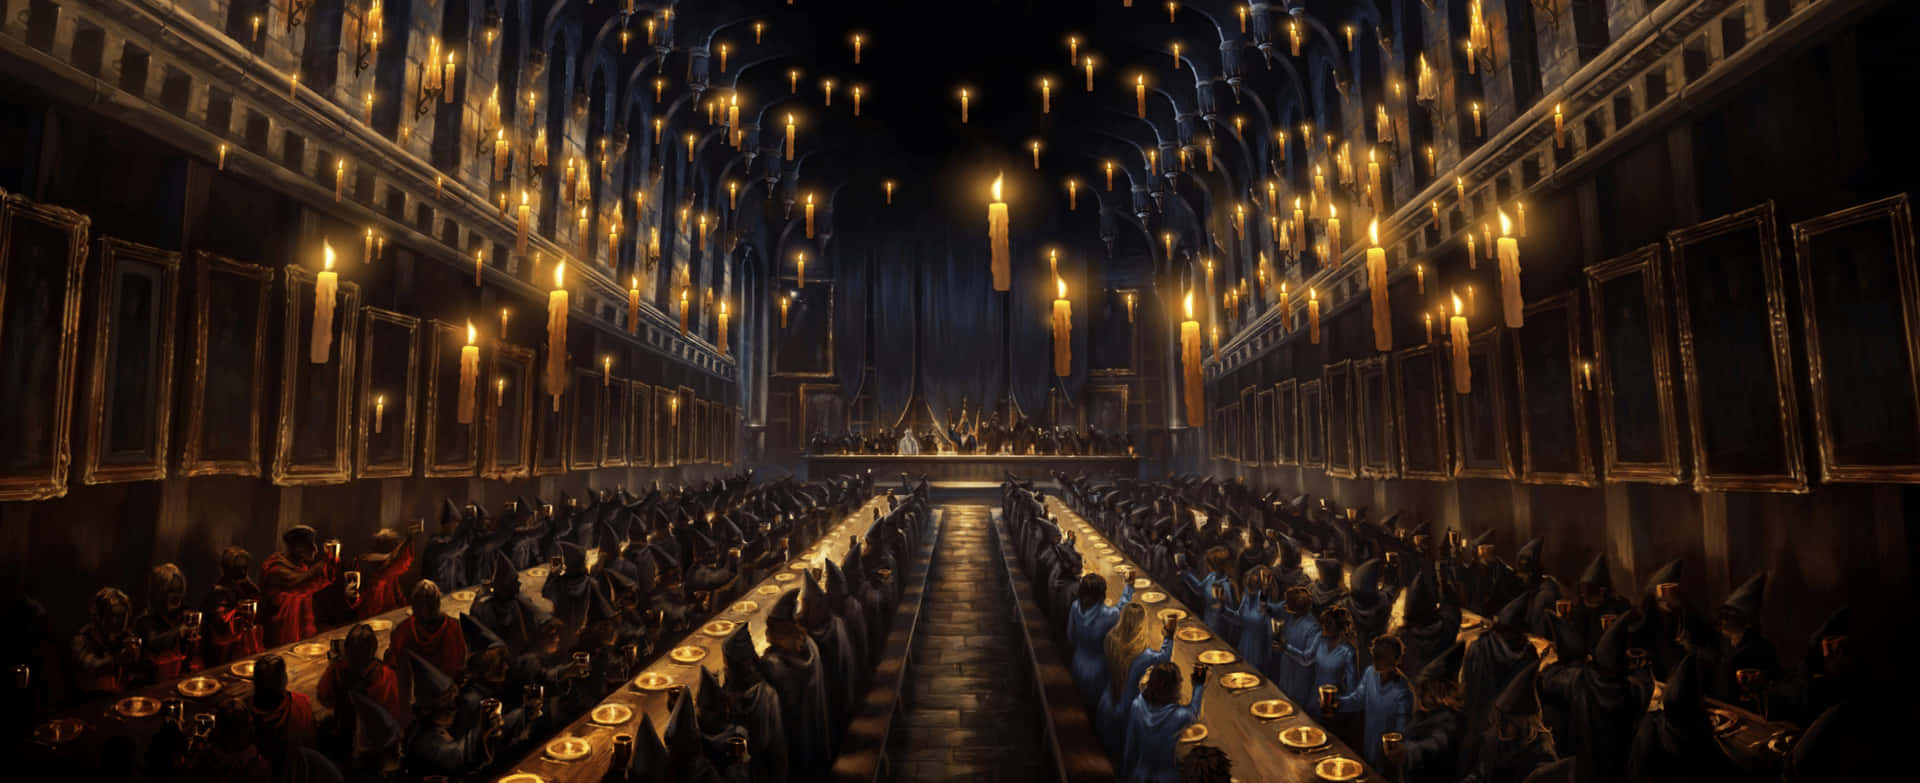 A magical view of the Hogwarts Great Hall" Wallpaper